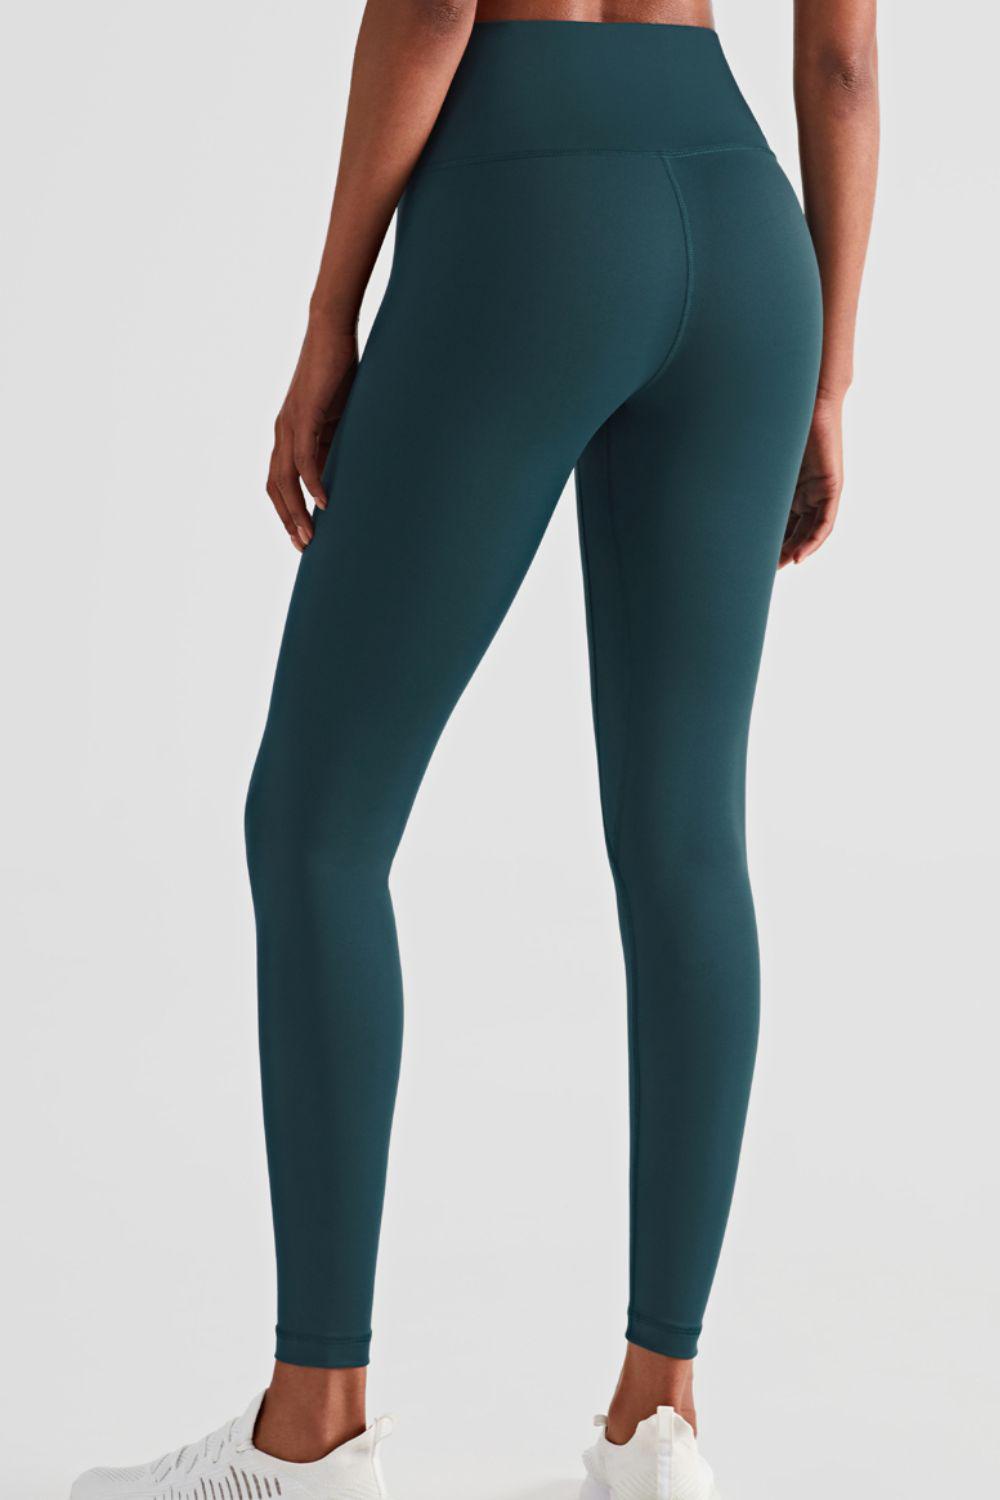 Change Your Thoughts Yoga Leggings BLUE ZONE PLANET